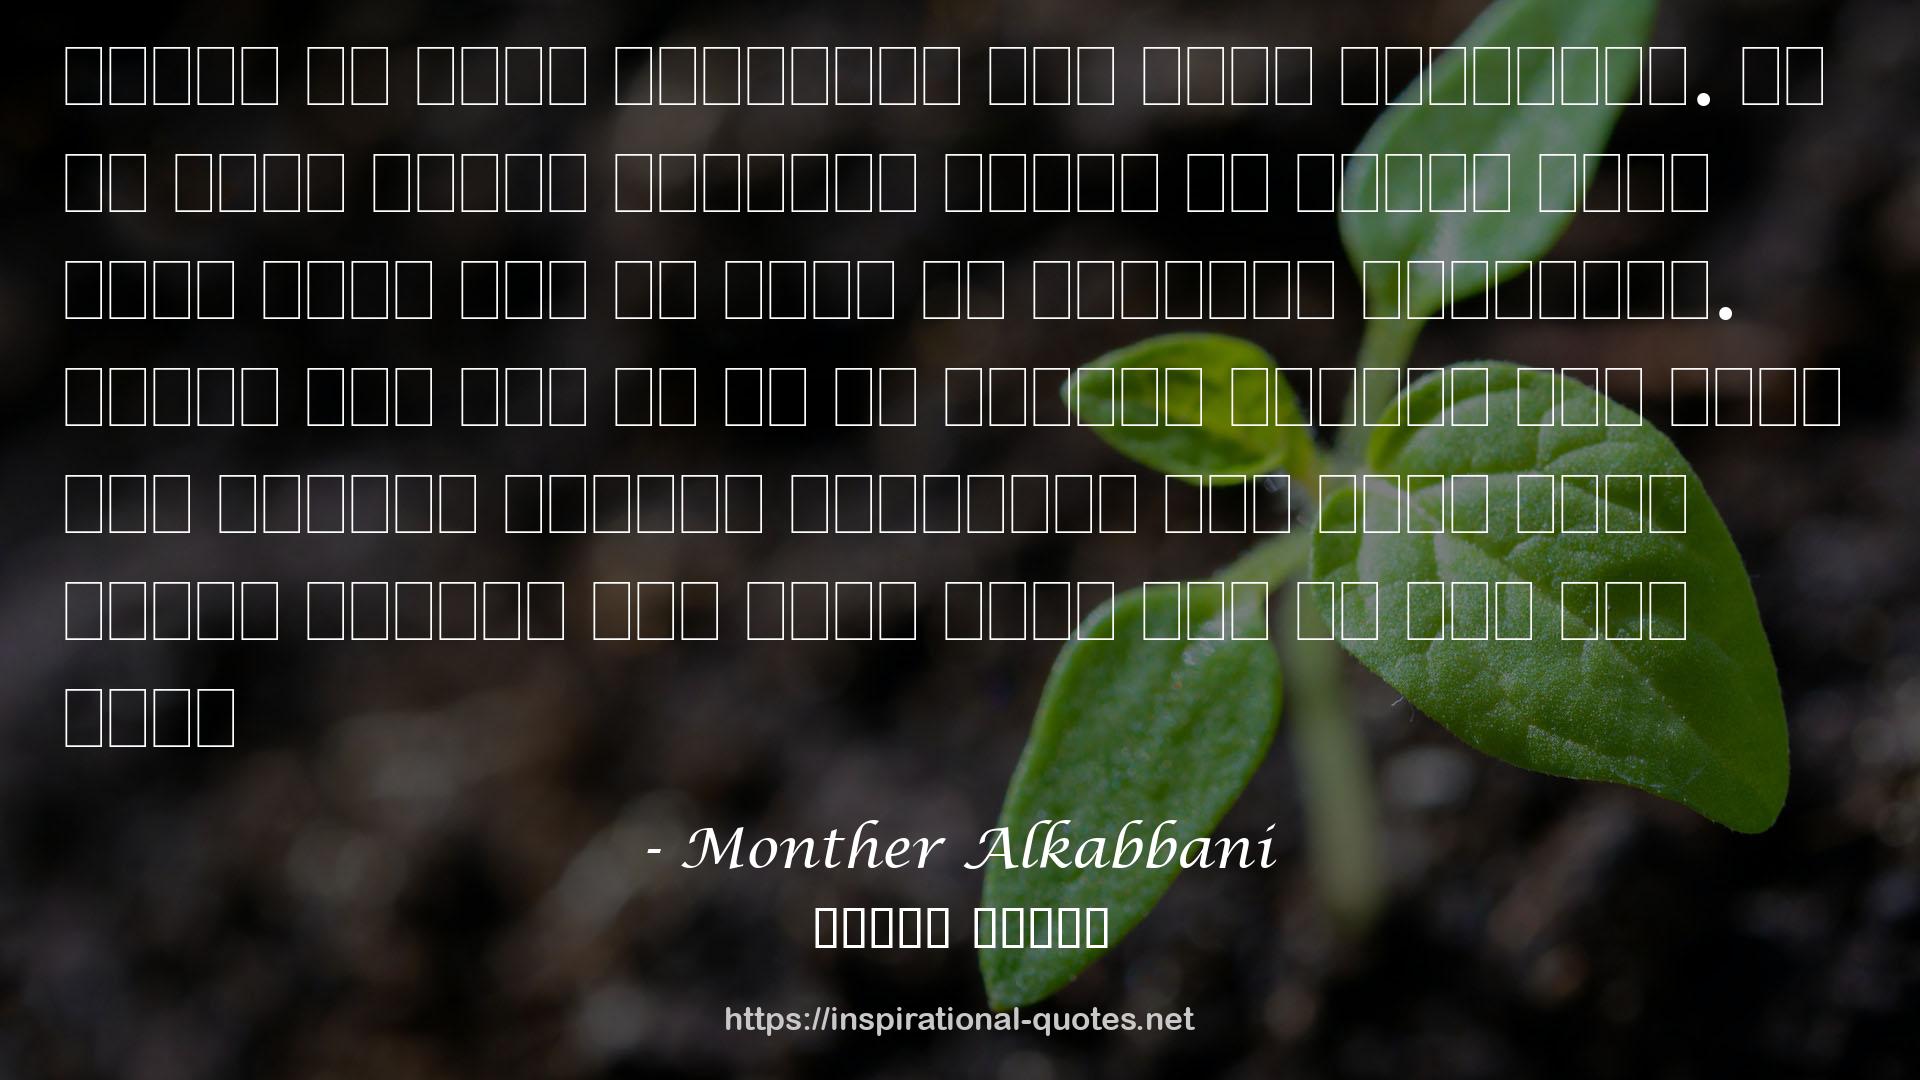 Monther Alkabbani QUOTES